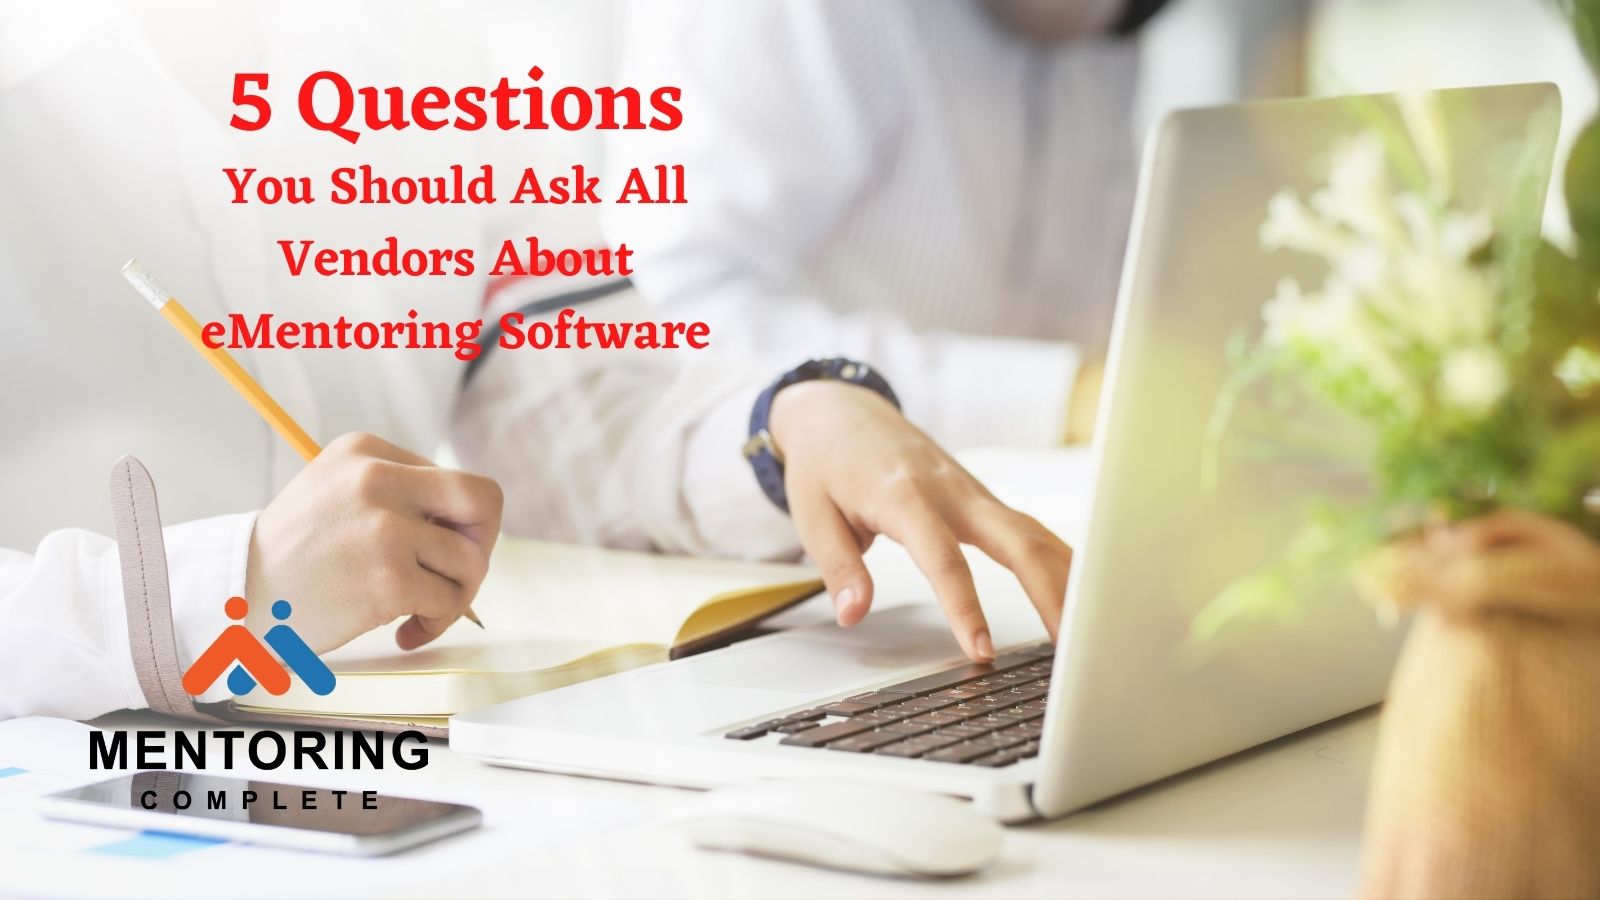 5 Questions about mentoring software